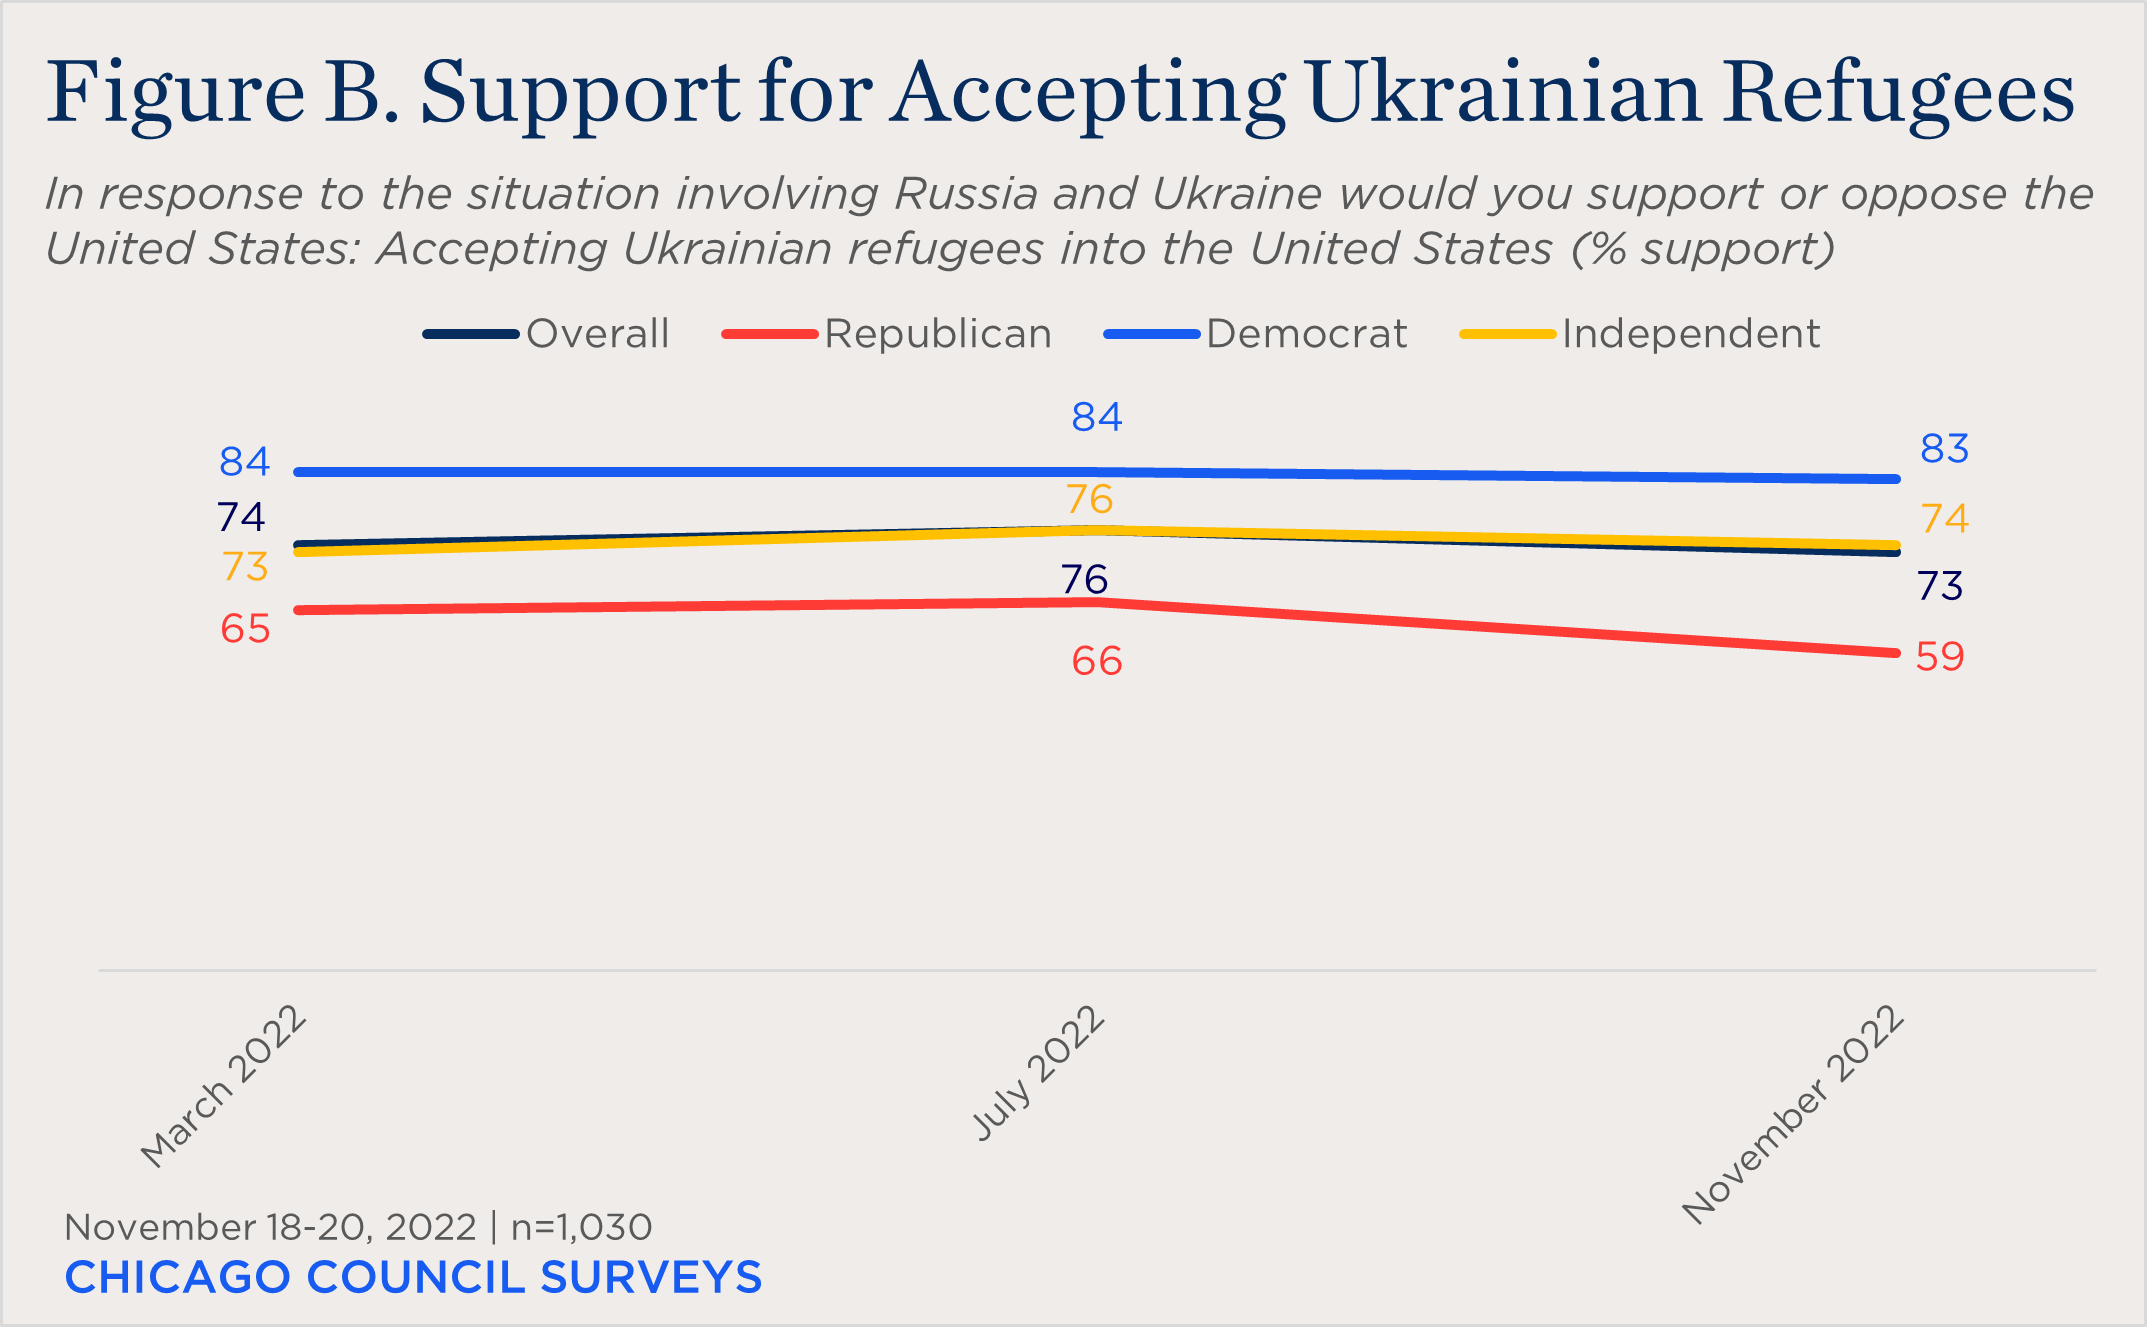 "line chart showing partisan support for accepting Ukrainian refugees"